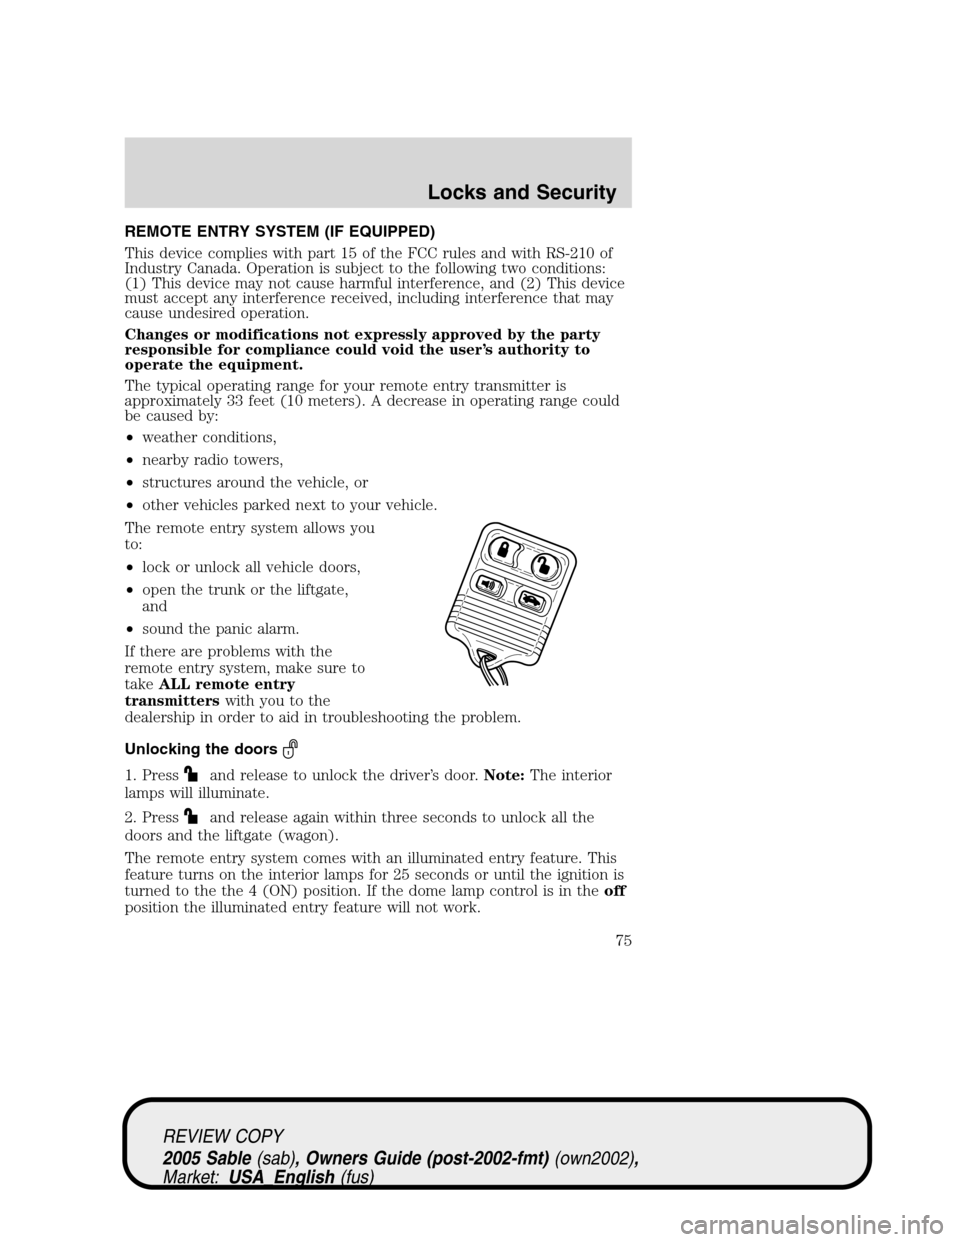 Mercury Sable 2005  Owners Manuals REMOTE ENTRY SYSTEM (IF EQUIPPED)
This device complies with part 15 of the FCC rules and with RS-210 of
Industry Canada. Operation is subject to the following two conditions:
(1) This device may not c